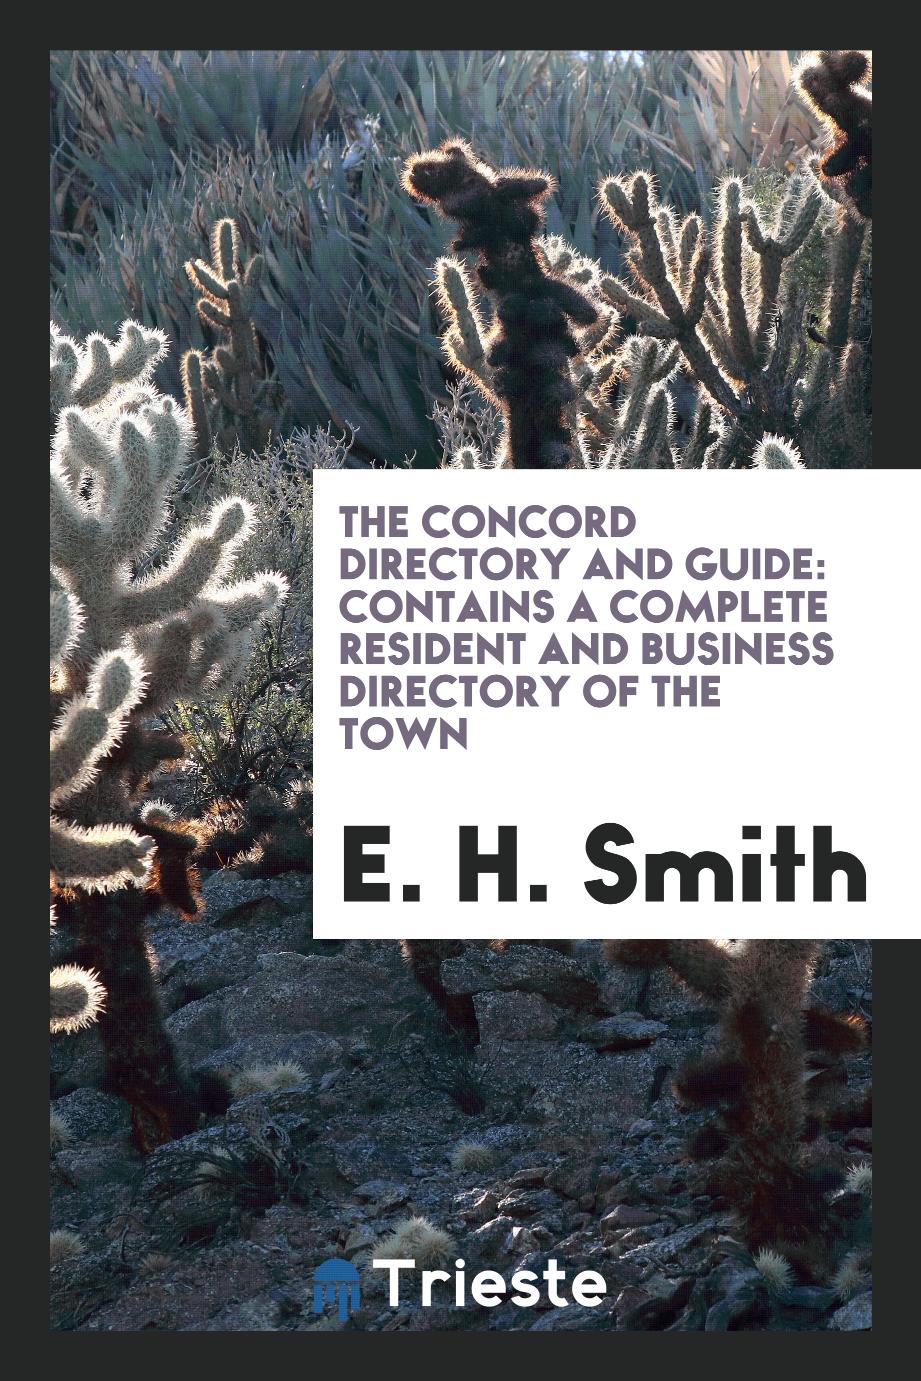 The Concord Directory and Guide: Contains a Complete Resident and Business Directory of the Town